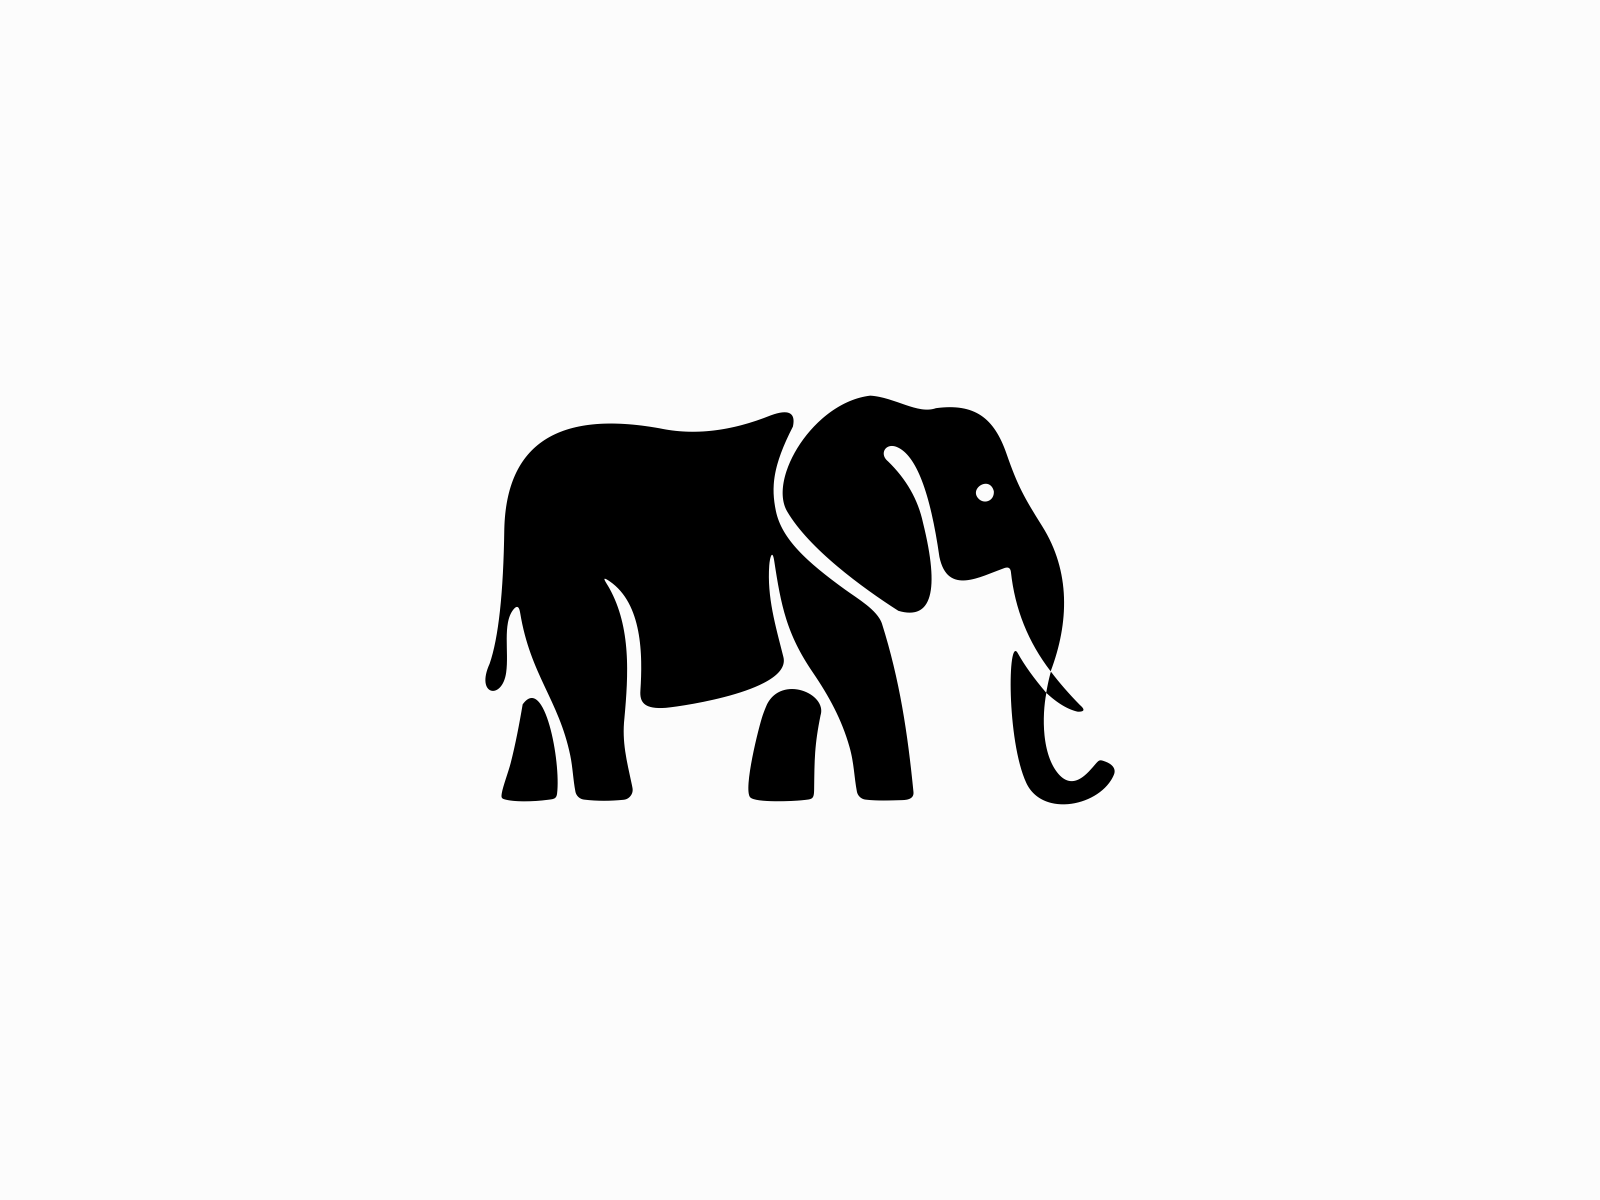 Design Inspiration Vector PNG Images, Elephant Logo Design Vector Template  Inspiration Vector, Abstract, Africa, Animal PNG Image For Free Download | Elephant  logo design, Elephant logo, Elephant icon